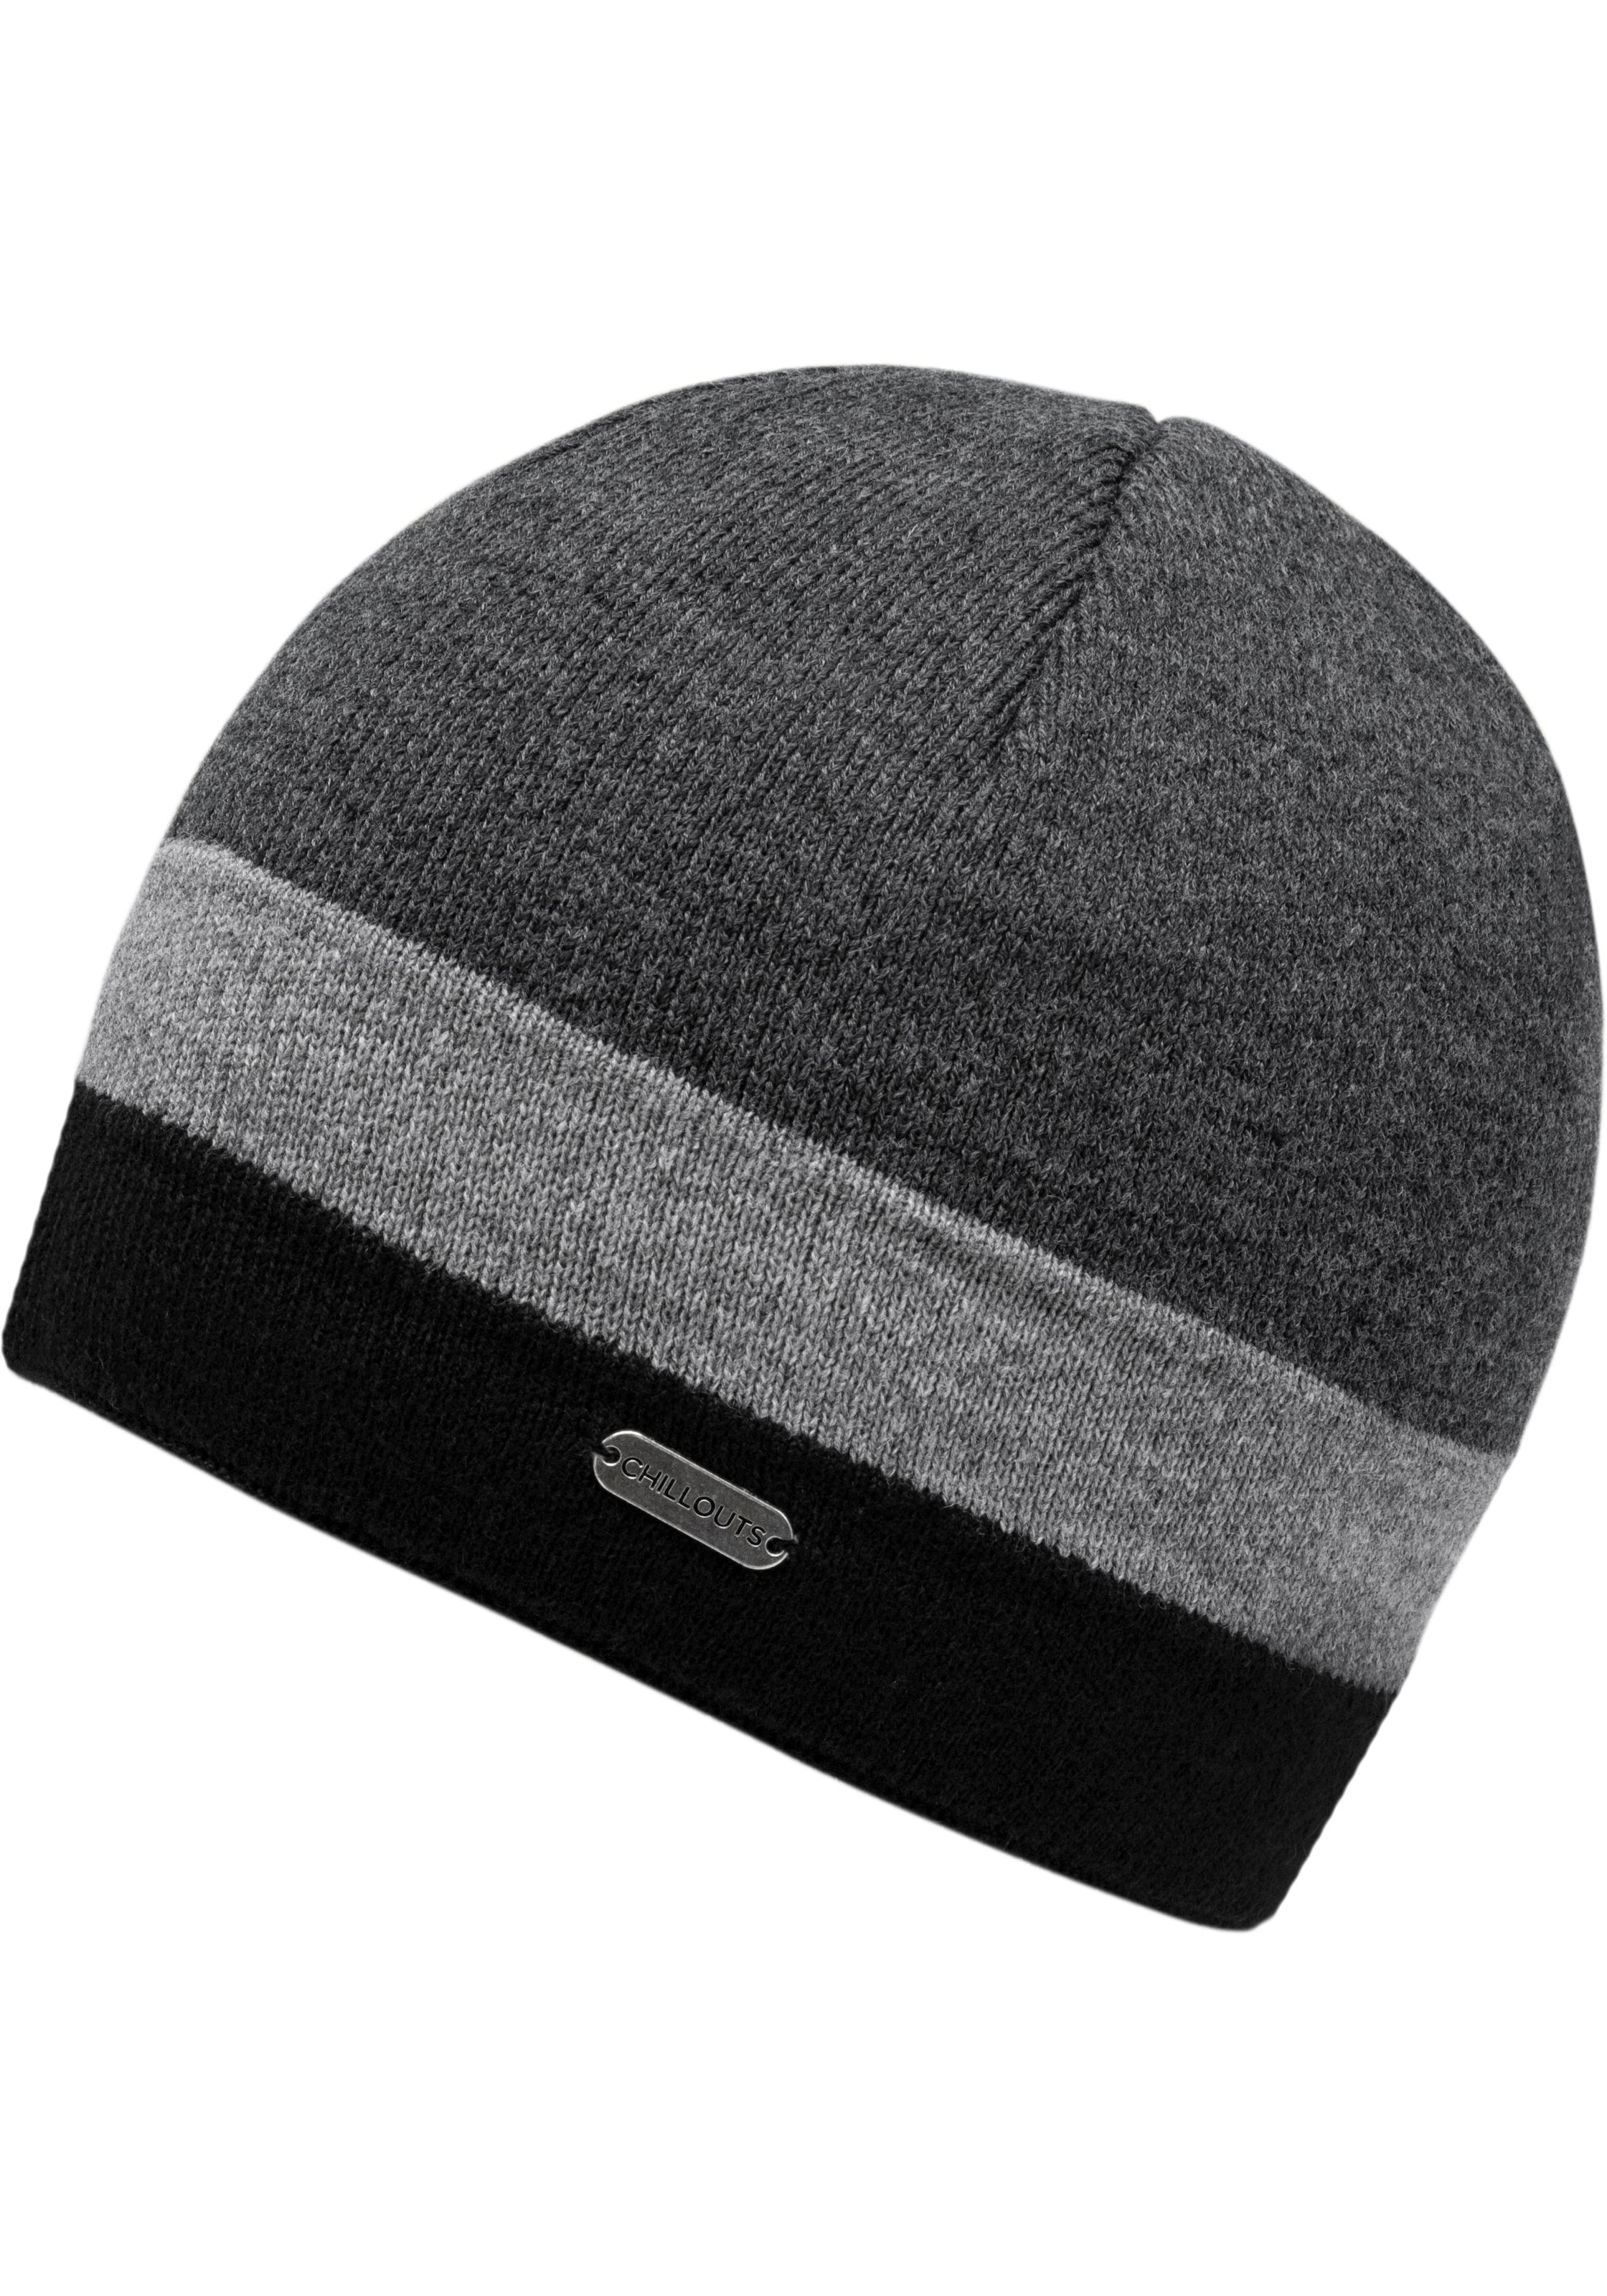 Beanie Hat UNIVERSAL chillouts kaufen Johnny | Hat«, »Johnny online